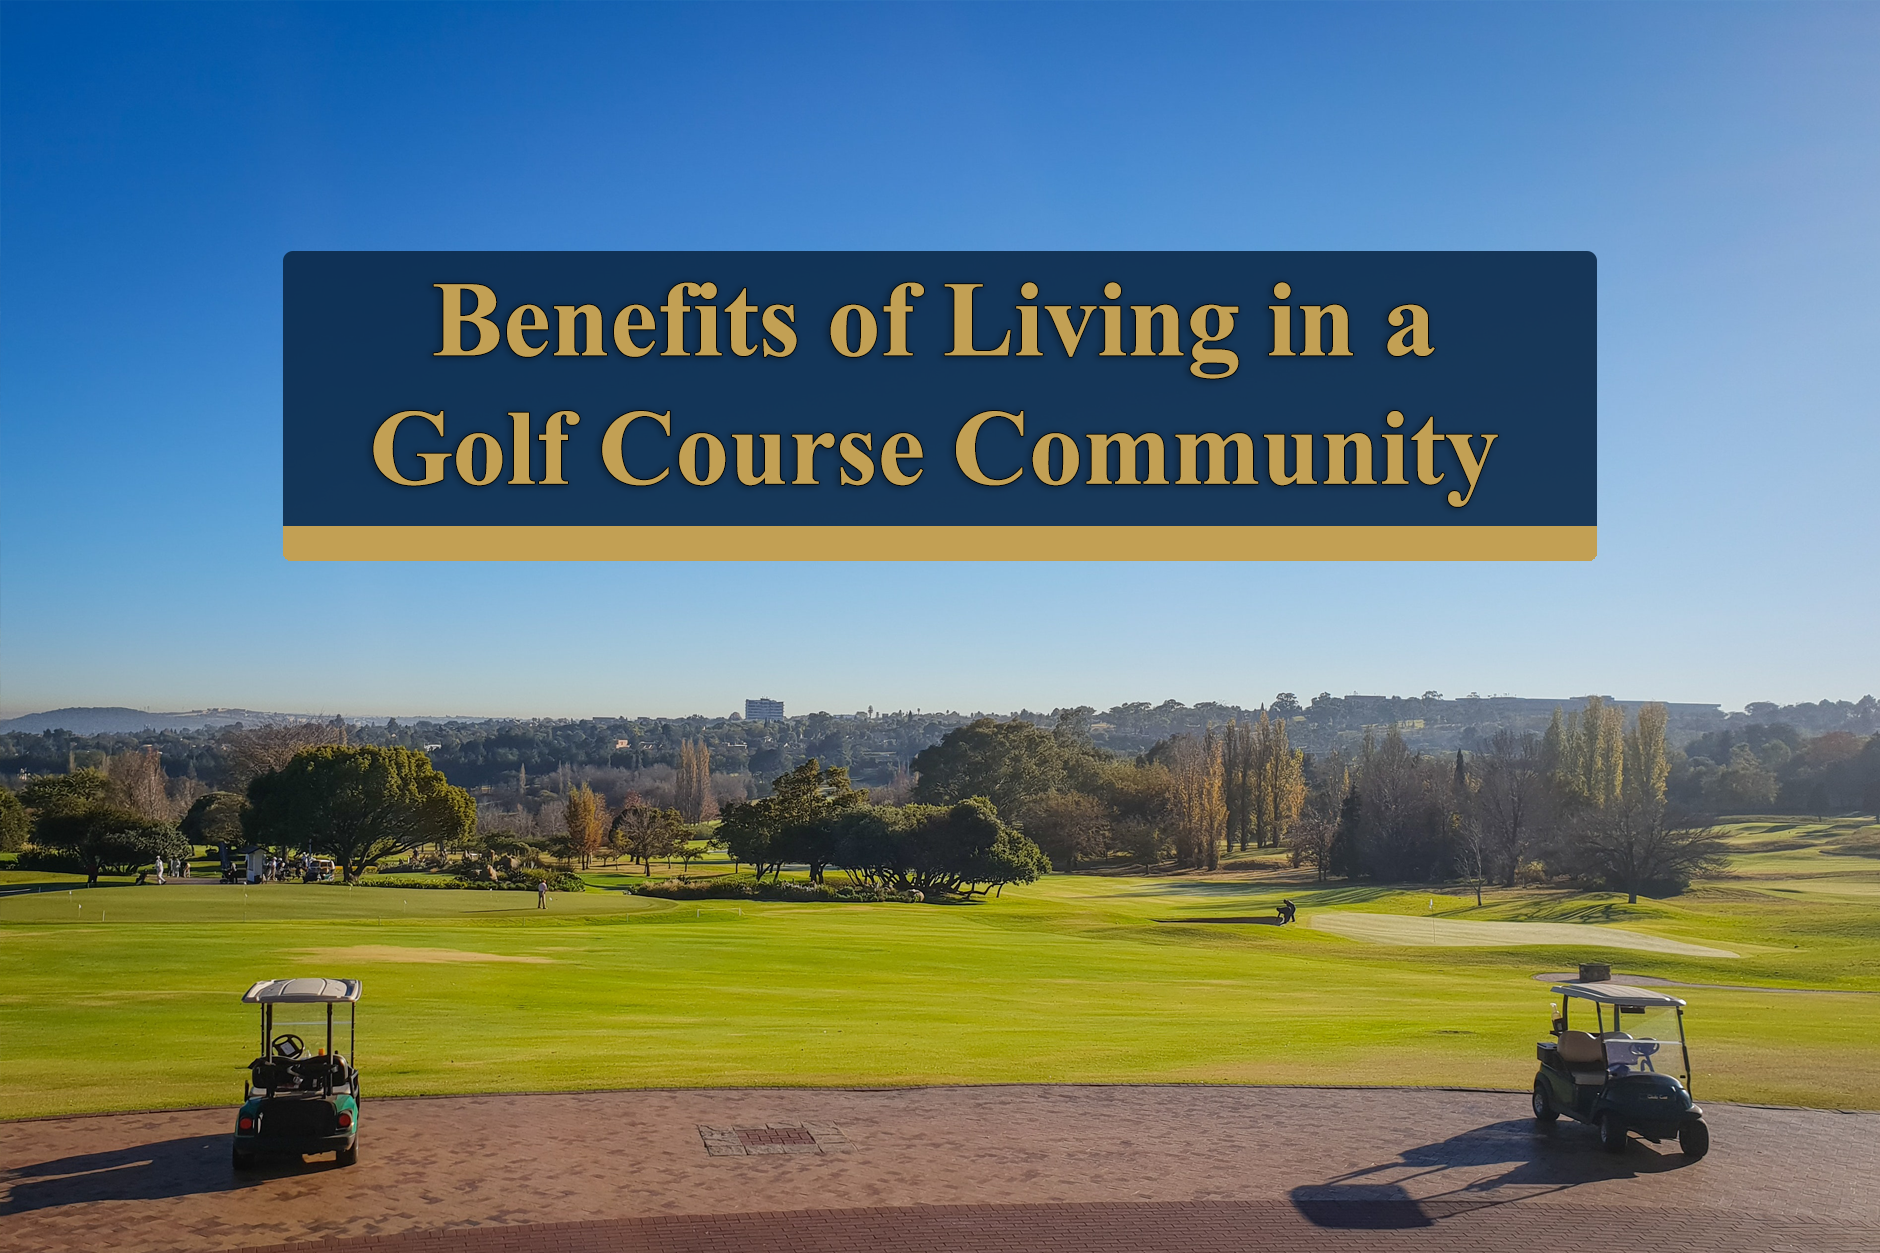 Benefits of Living in a Golf Course Community